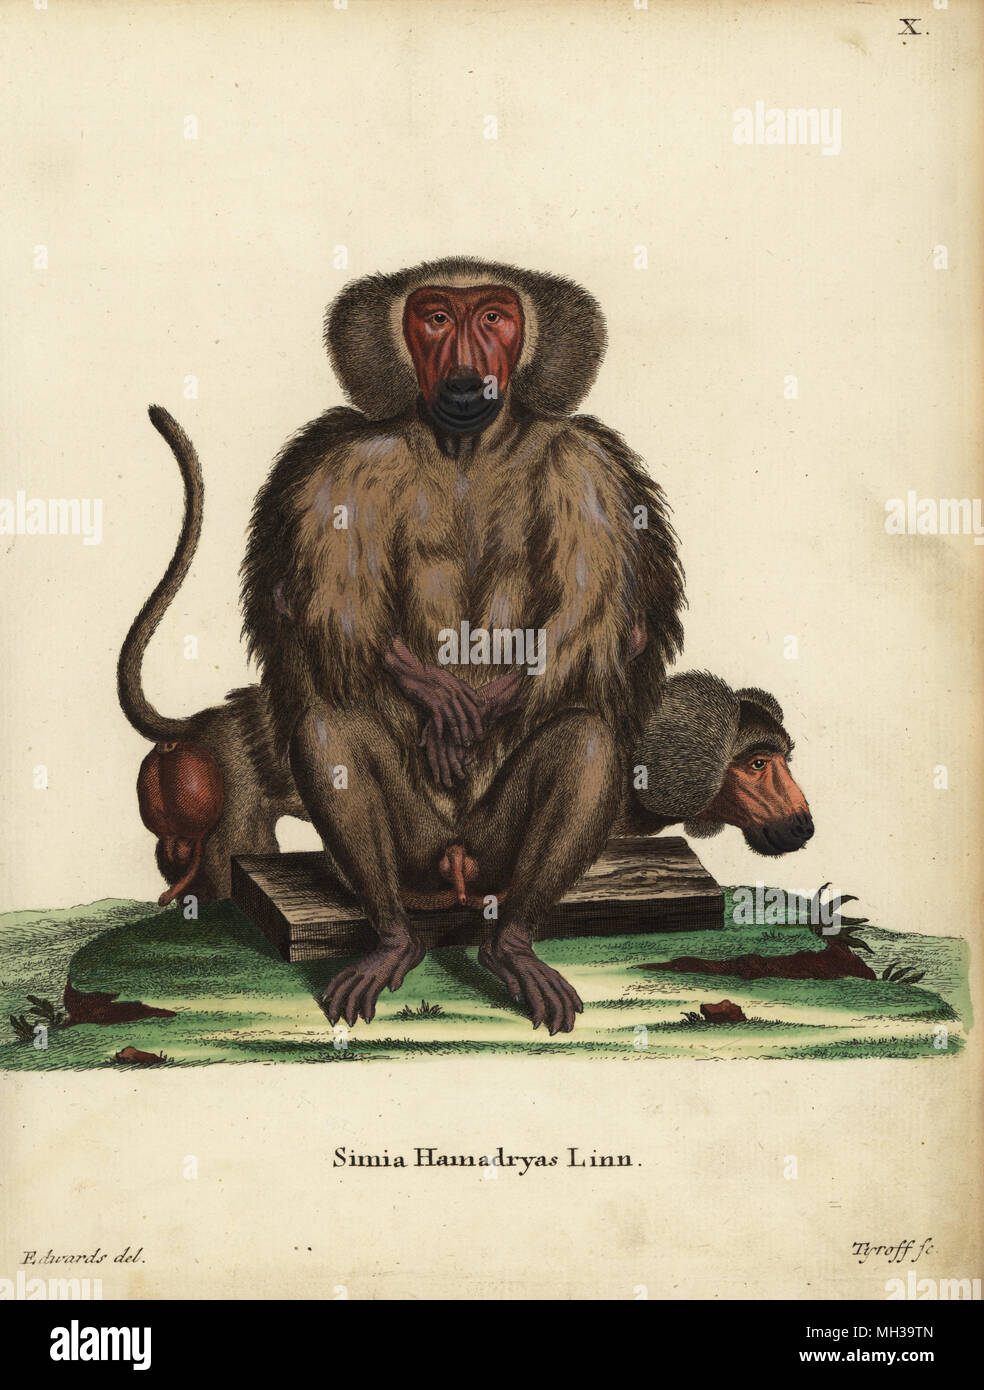 Hamadryas baboon, Papio hamadryas. Simia hamadryas Linn. Handcoloured copperplate engraving by Tyroff after an illustration by George Edwards from Johann Christian Daniel Schreber's Animal Illustrations after Nature, or Schreber's Fantastic Animals, Erlangen, Germany, 1775. Stock Photo